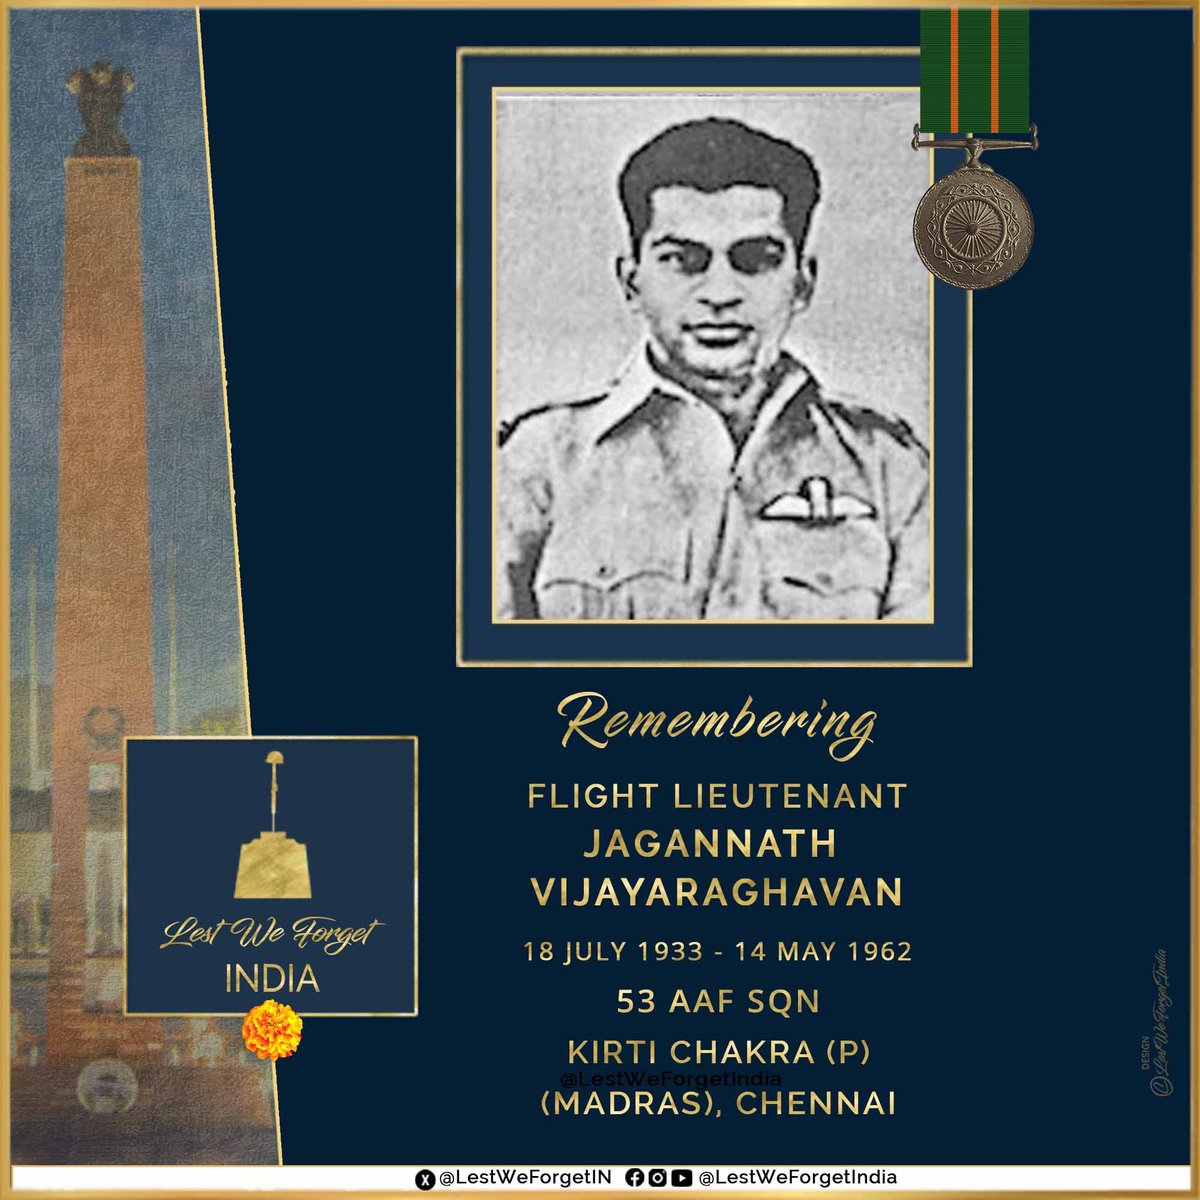 #LestWeForgetIndia🇮🇳 the supreme sacrifice of Flt Lt Jagannath Vijayaraghavan, Kirti Chakra (P), during a training sortie in (Madras) Chennai #OnThisDay 14 May in 1962 The #IndianBrave ensured safety of the trainee pilot officer at the cost of his own🏵️